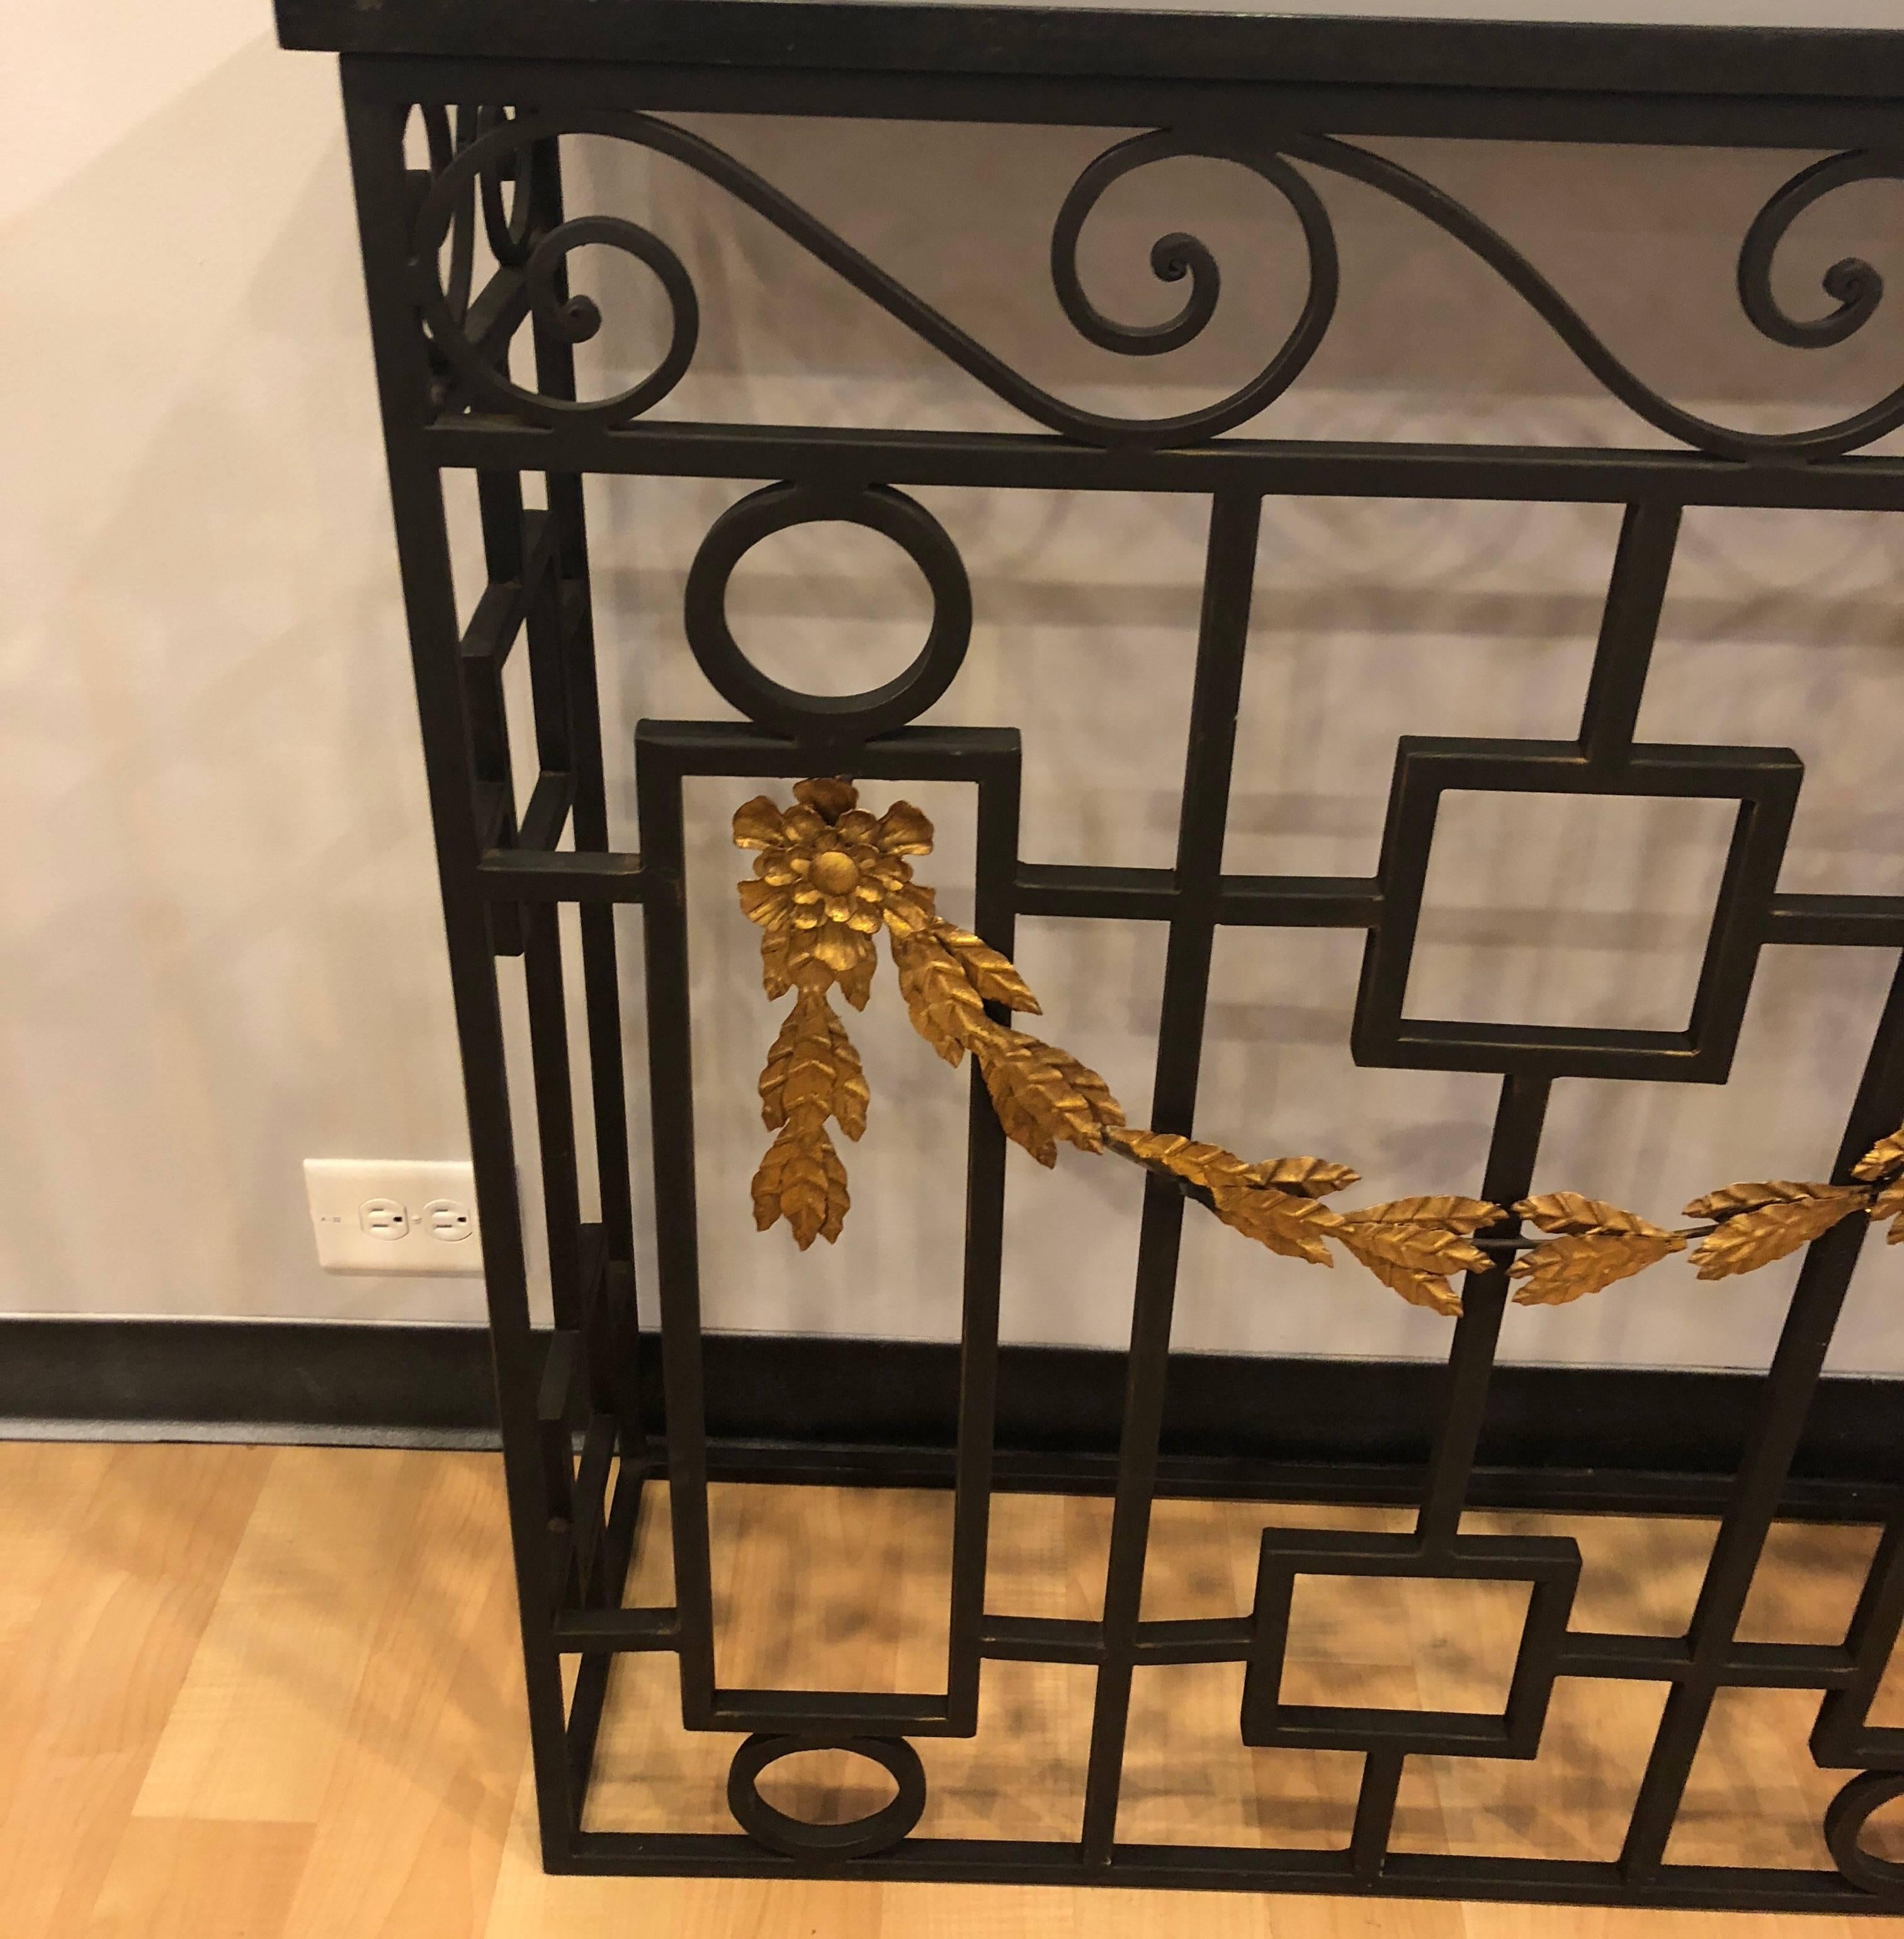 Metal and marble console table with gold scroll work. Excellent condition with no losses to metal or damage to marble. Would be perfect as console or could be used as a radiator cover.